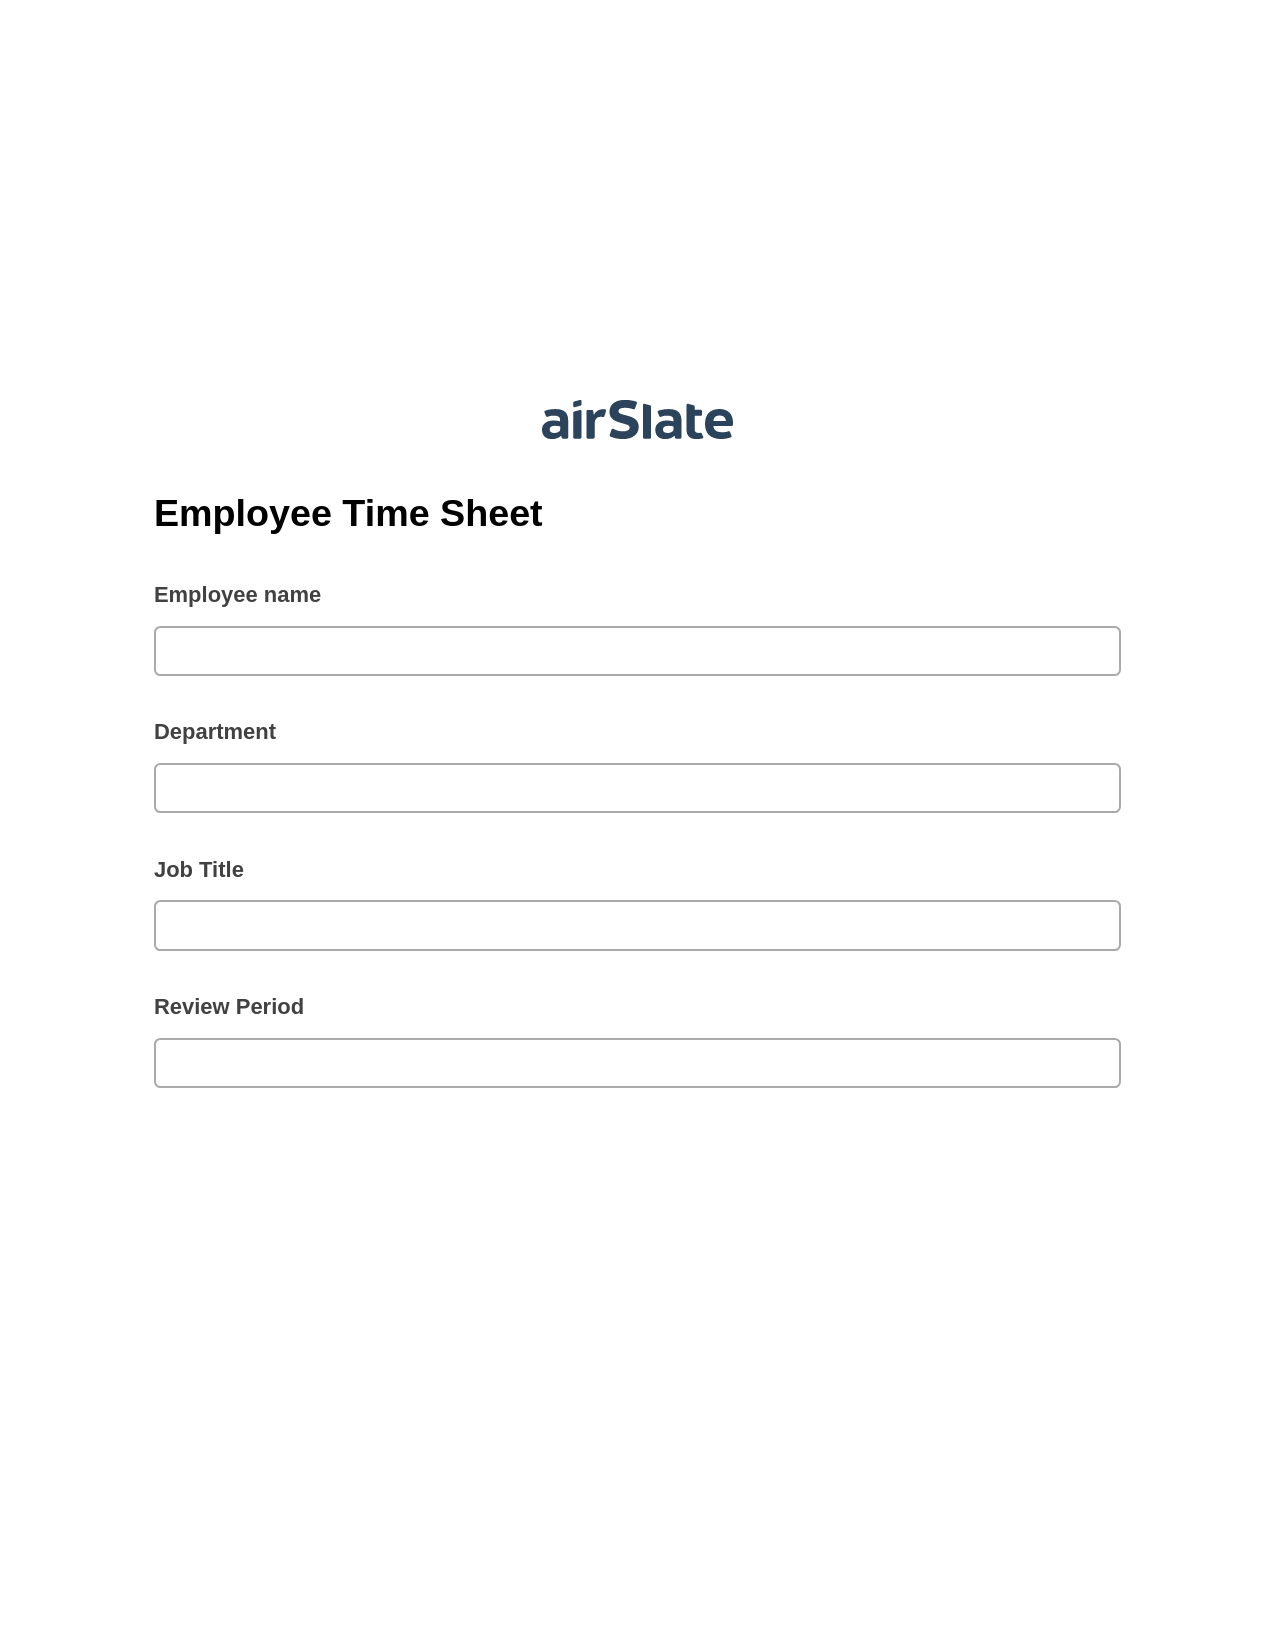 Employee Time Sheet Prefill from NetSuite records, Update Audit Trail Bot, Export to WebMerge Bot